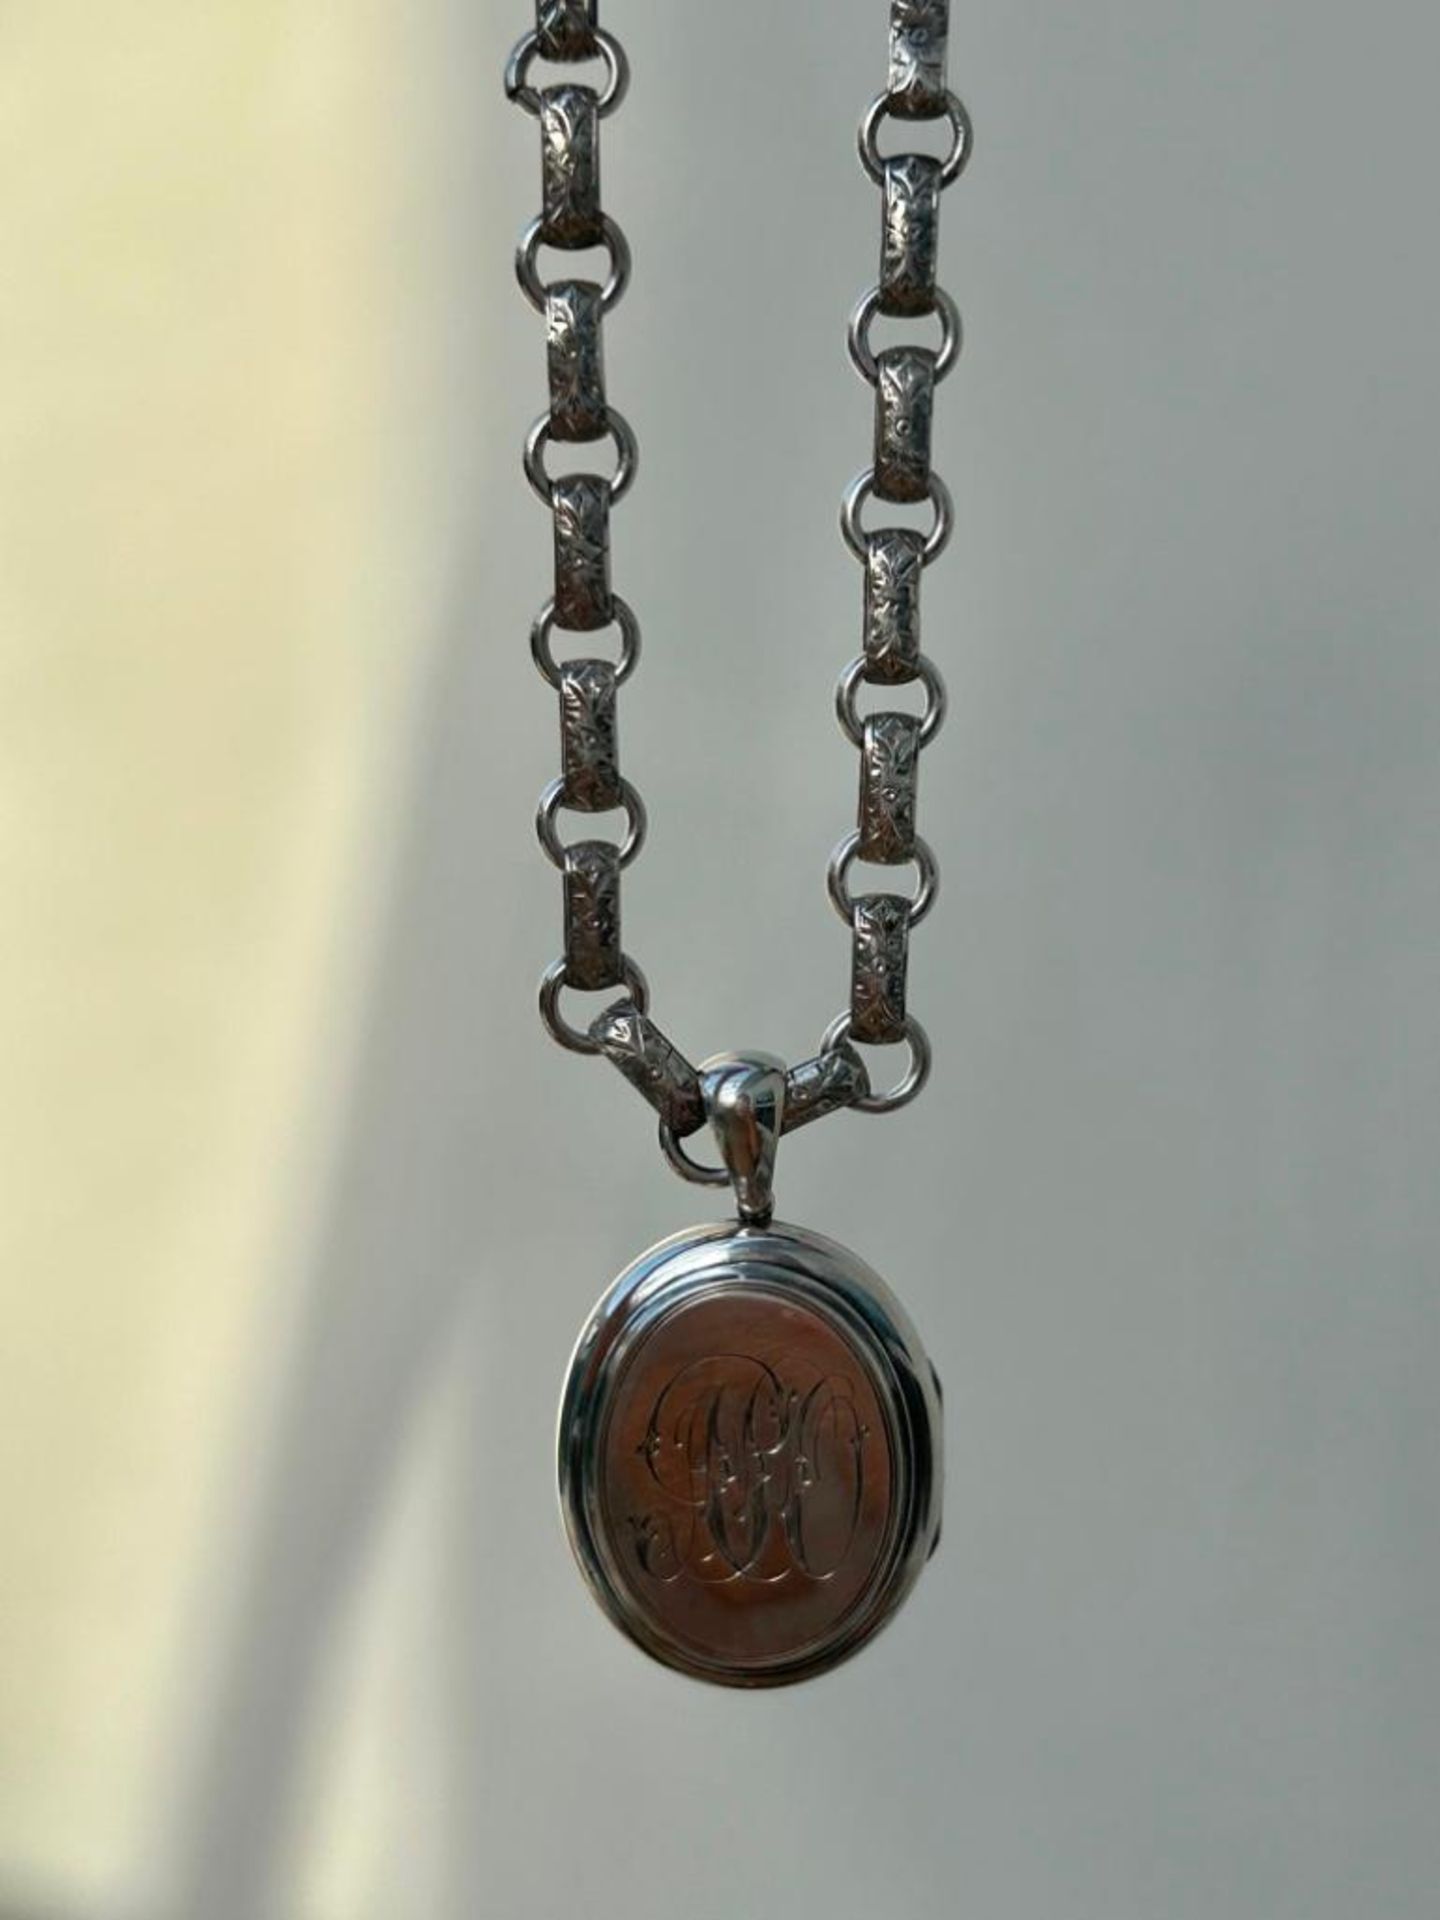 Antique Bookchain and Locket Pendant in Silver - Image 3 of 7